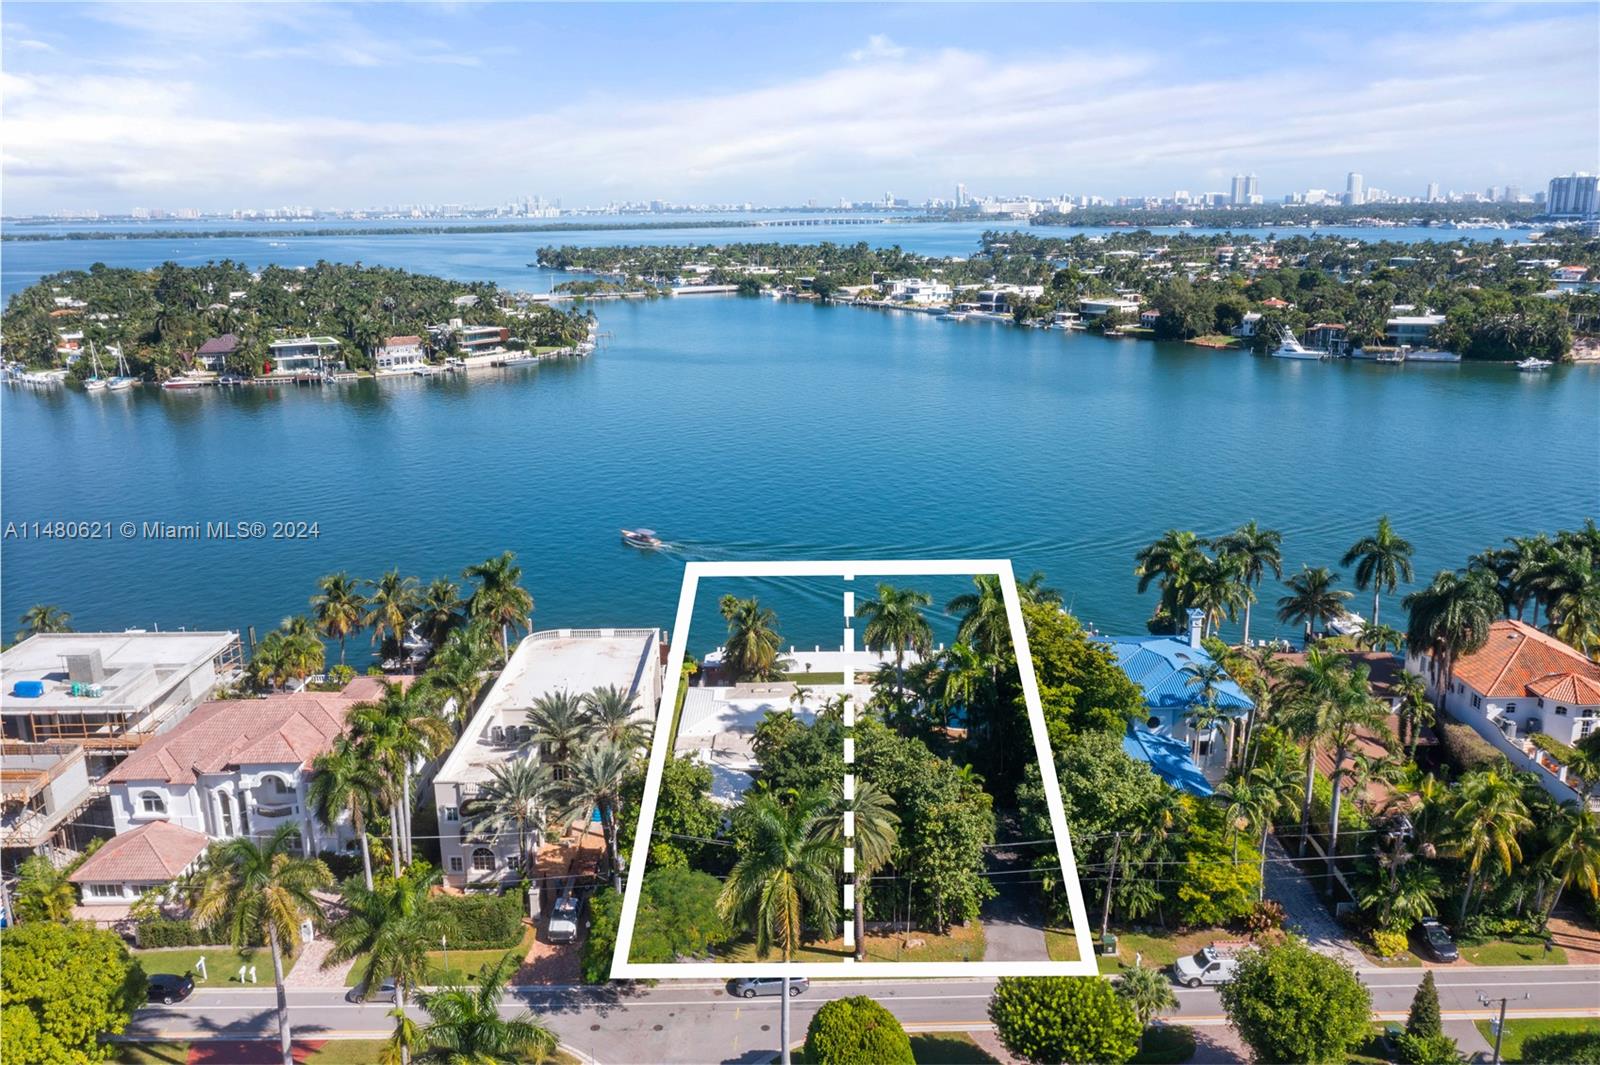 Best Opportunity on the market & repriced to Sell! Best location on Hibiscus Island premier WIDE BAYFRONT property, double sized Lot, with 120’ of linear waterfront on 24-hour guard gated Hibiscus Island - Northern exposure. Ready for re-development - one or two homes - NW exposure - captivating unobstructed open bay views of the Venetian Isles and downtown Miami skyline.  Also included is the largest dock on the island (100 x 30 ft).  Call listing agent for more details. please do not disturb current occupants.